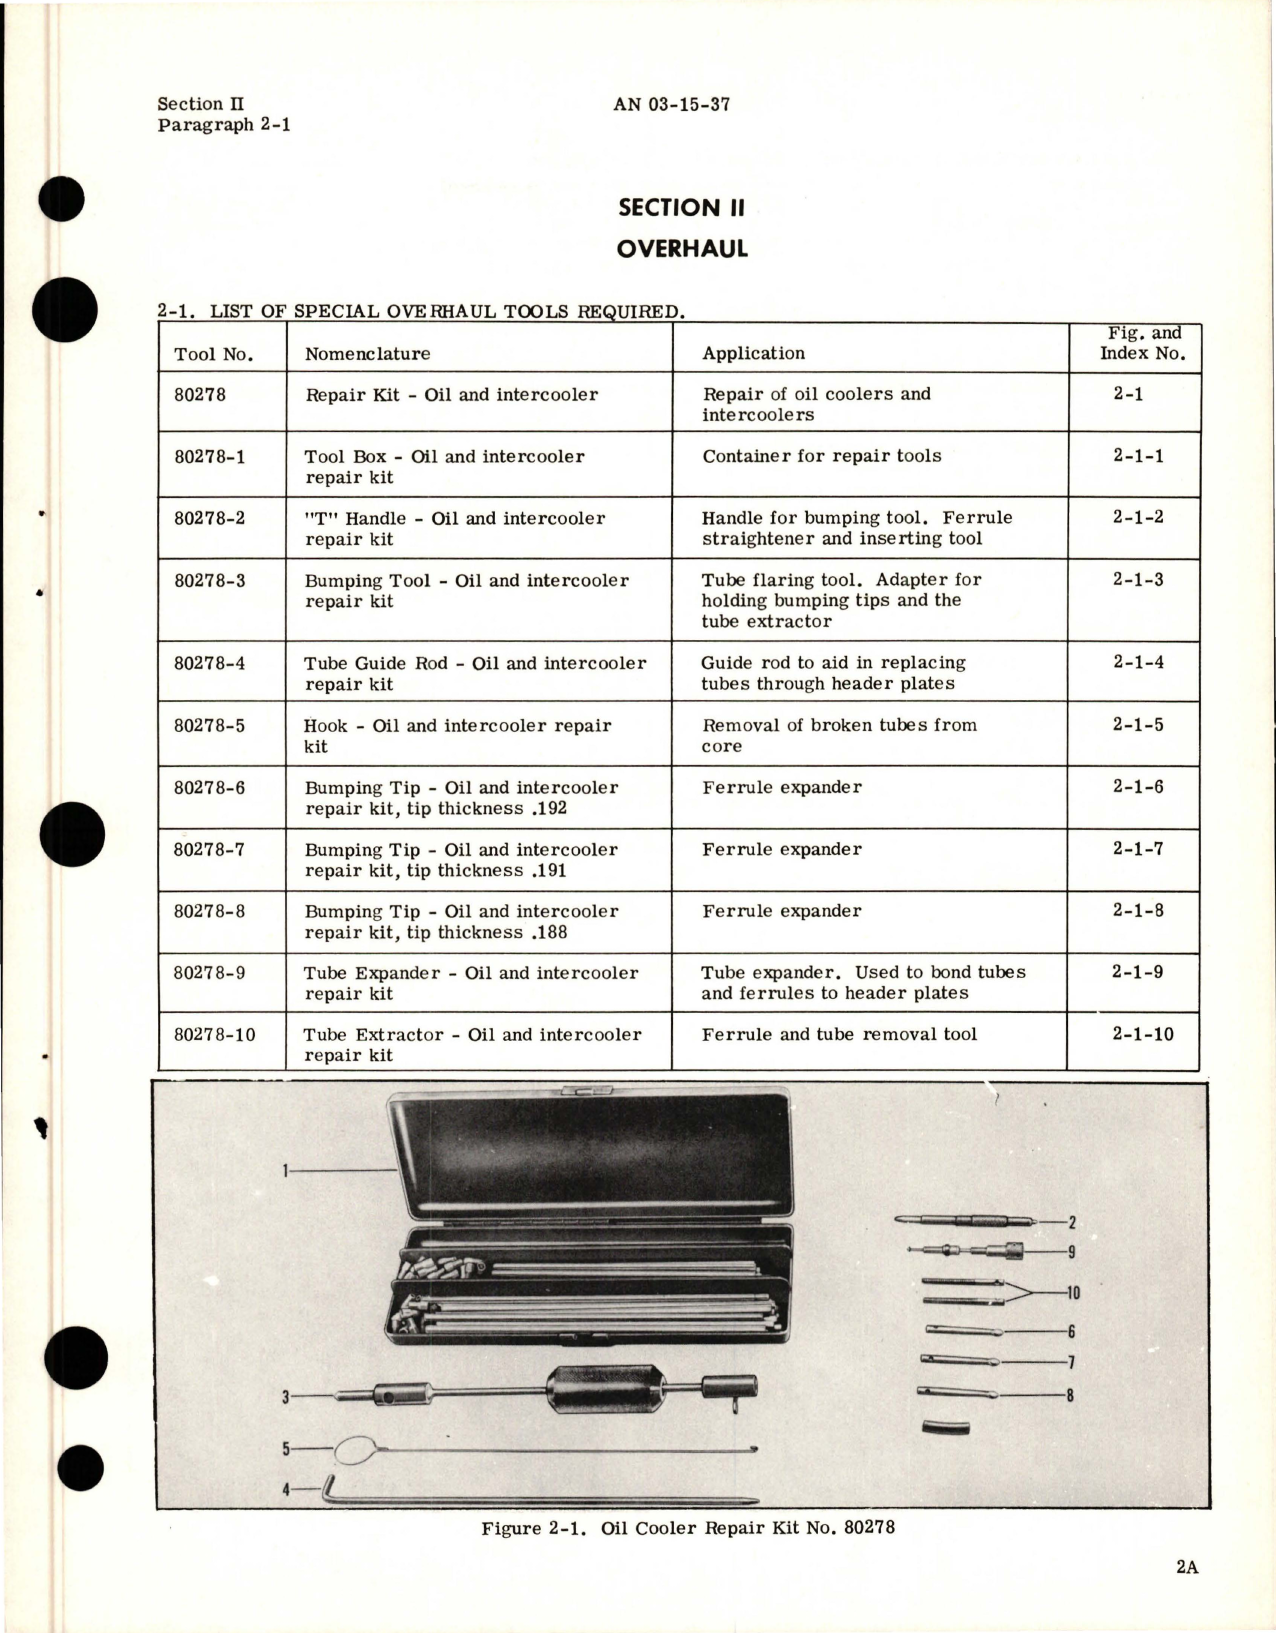 Sample page 7 from AirCorps Library document: Overhaul Instructions for Oil Temperature Regulators Oil Coolers Valves